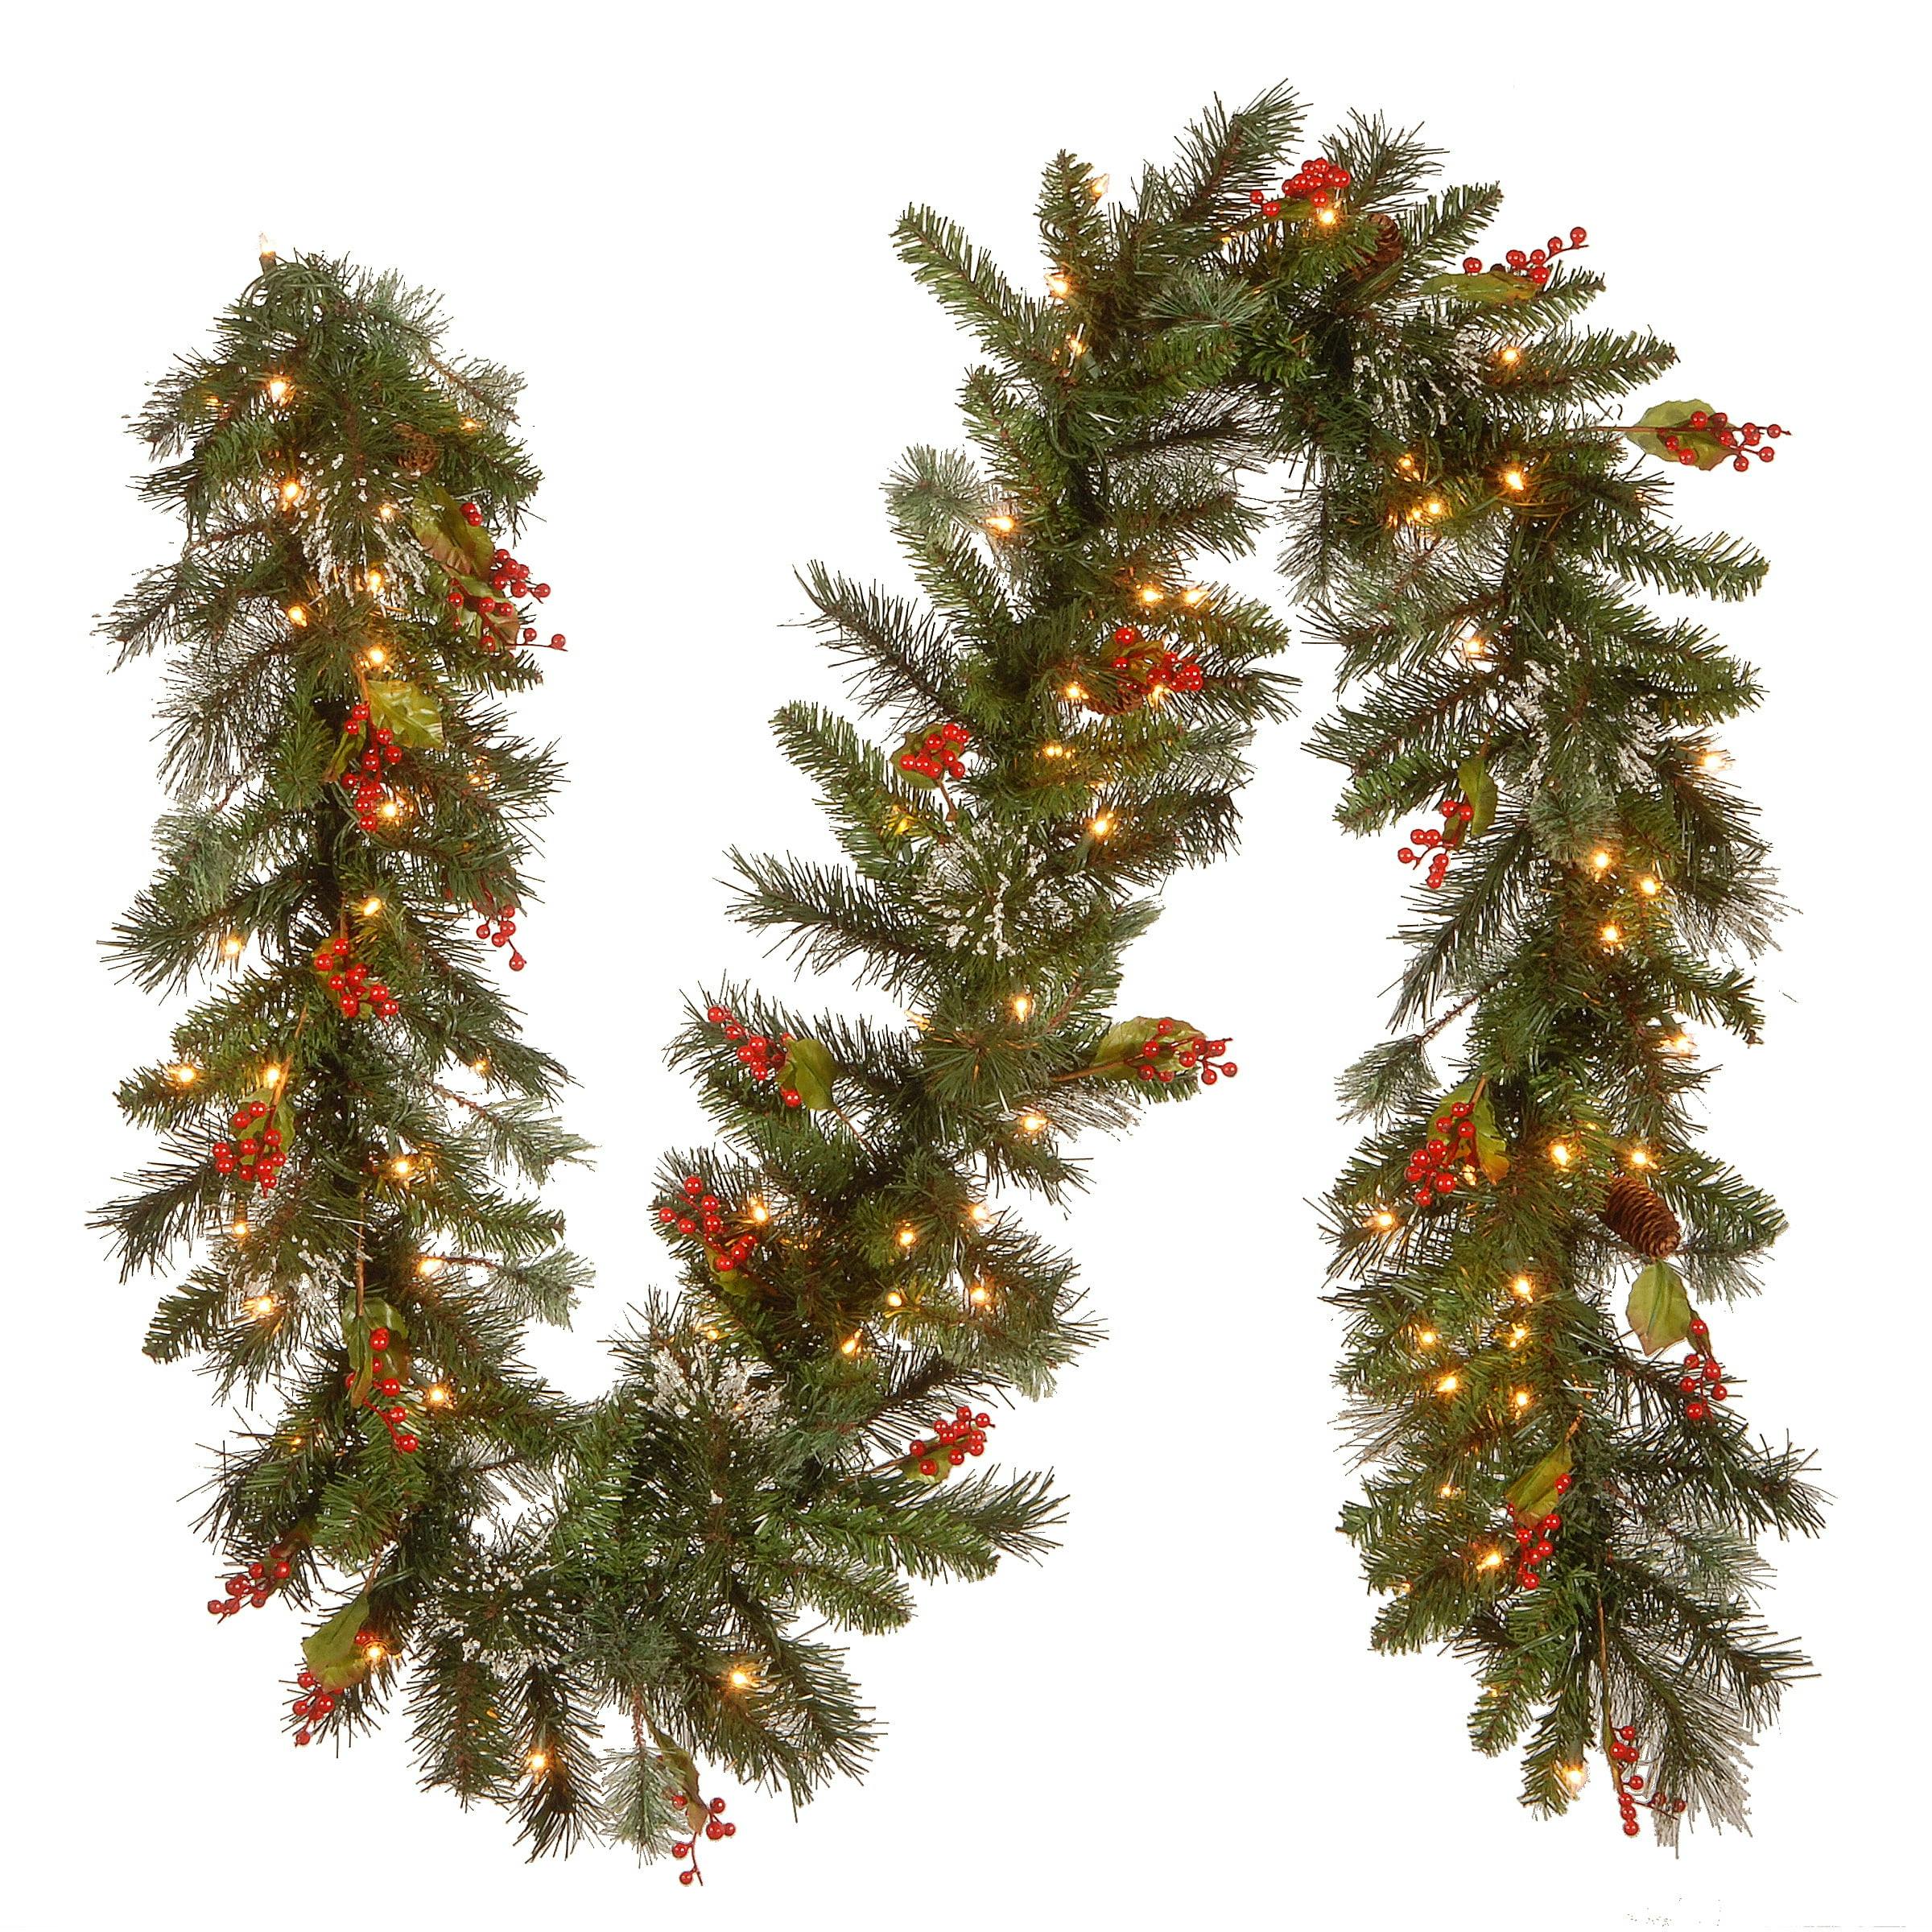 Wintry Pine Pre-Lit Garland with Pine Cones and Snow, 9 Feet